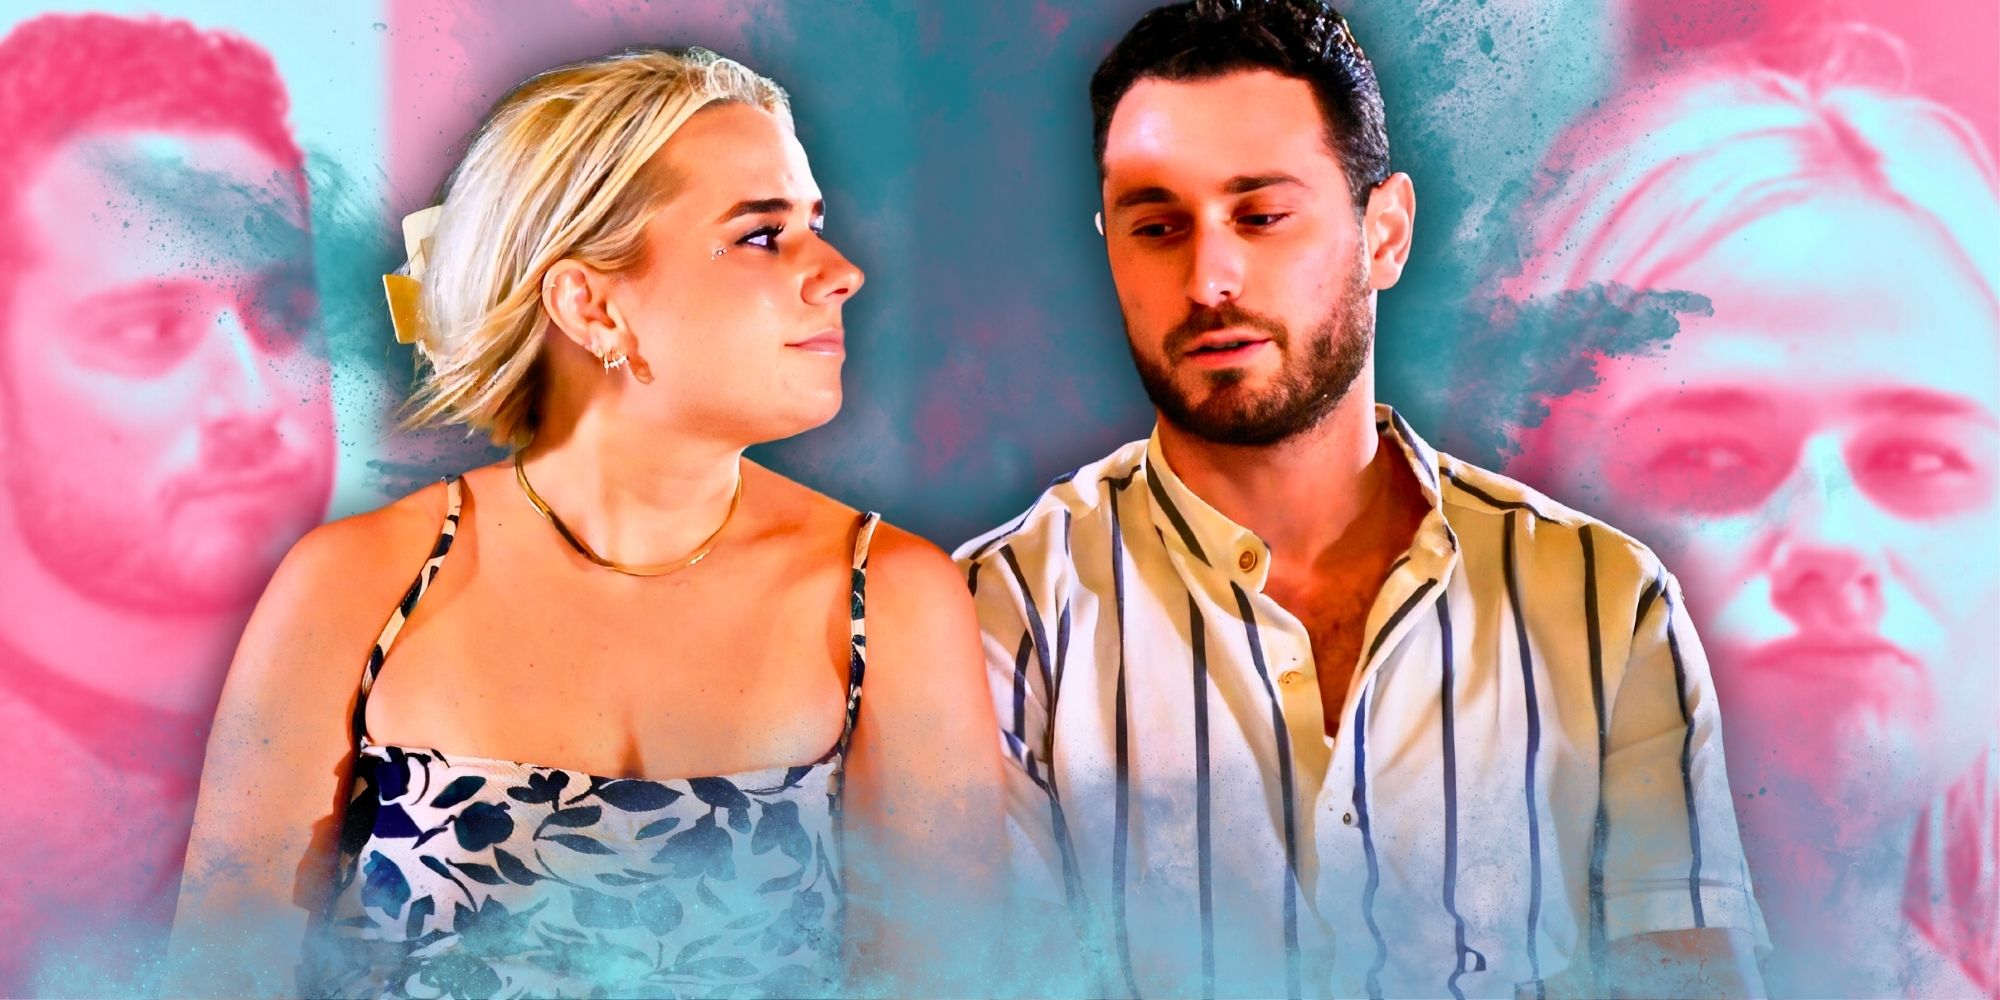 Married At First Sight Fan Theory Proves Brennan Is Only Trying To Protect Himself & Not Emily